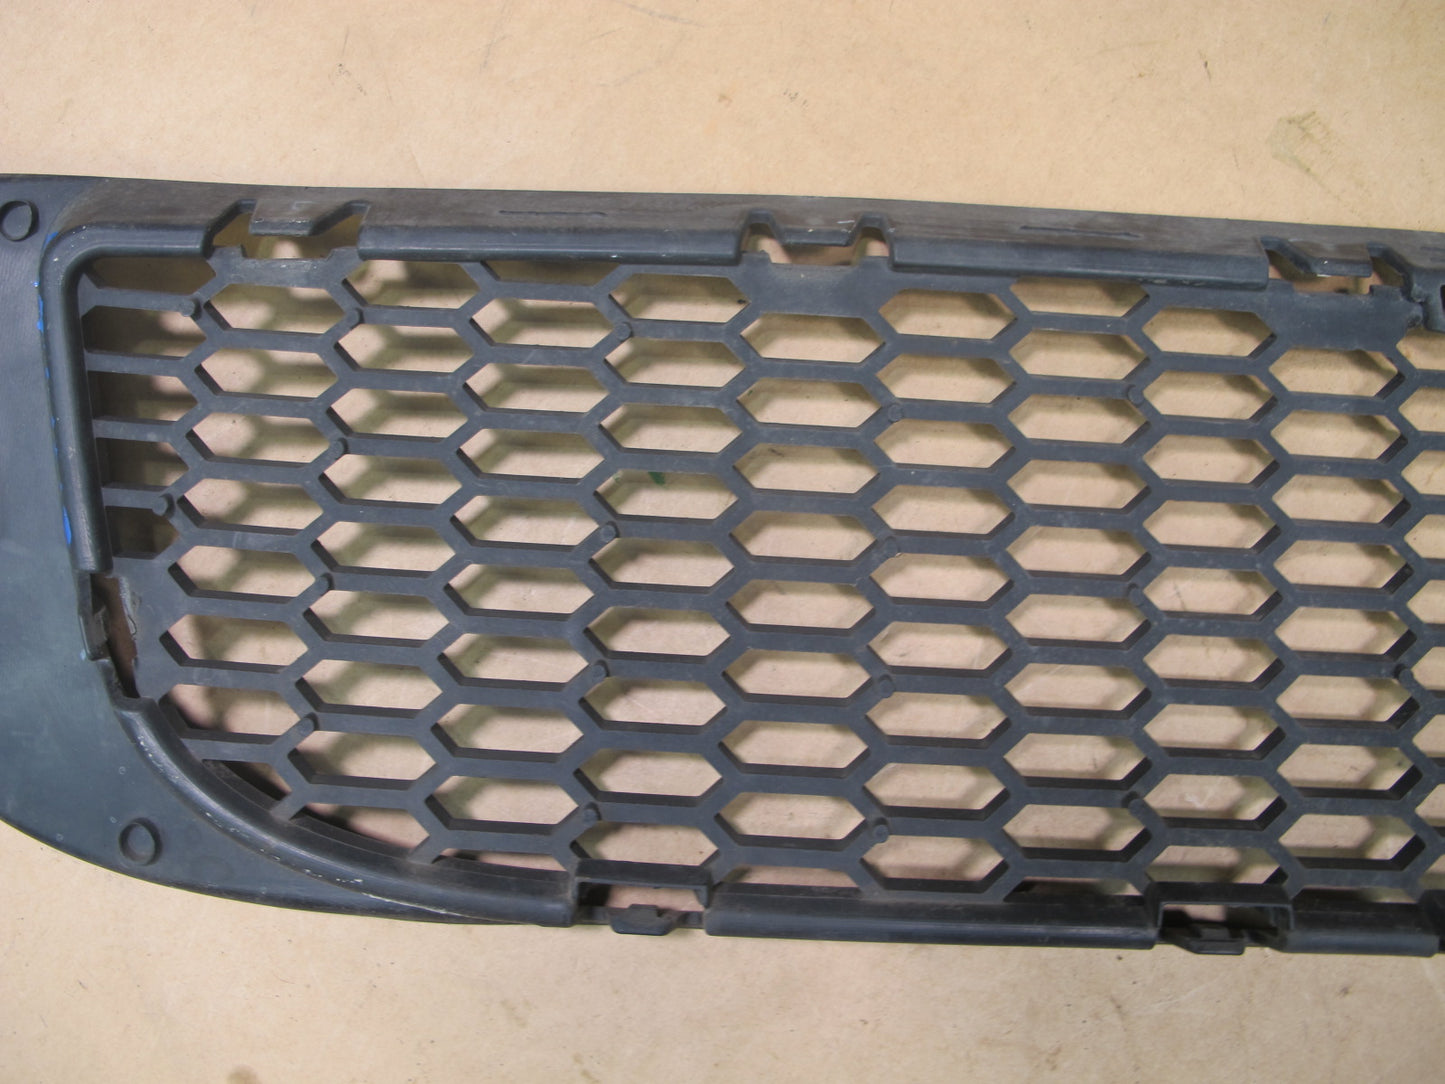 07-10 BMW E83 X3 FRONT LOWER BUMPER GRILLE 3417722 OEM